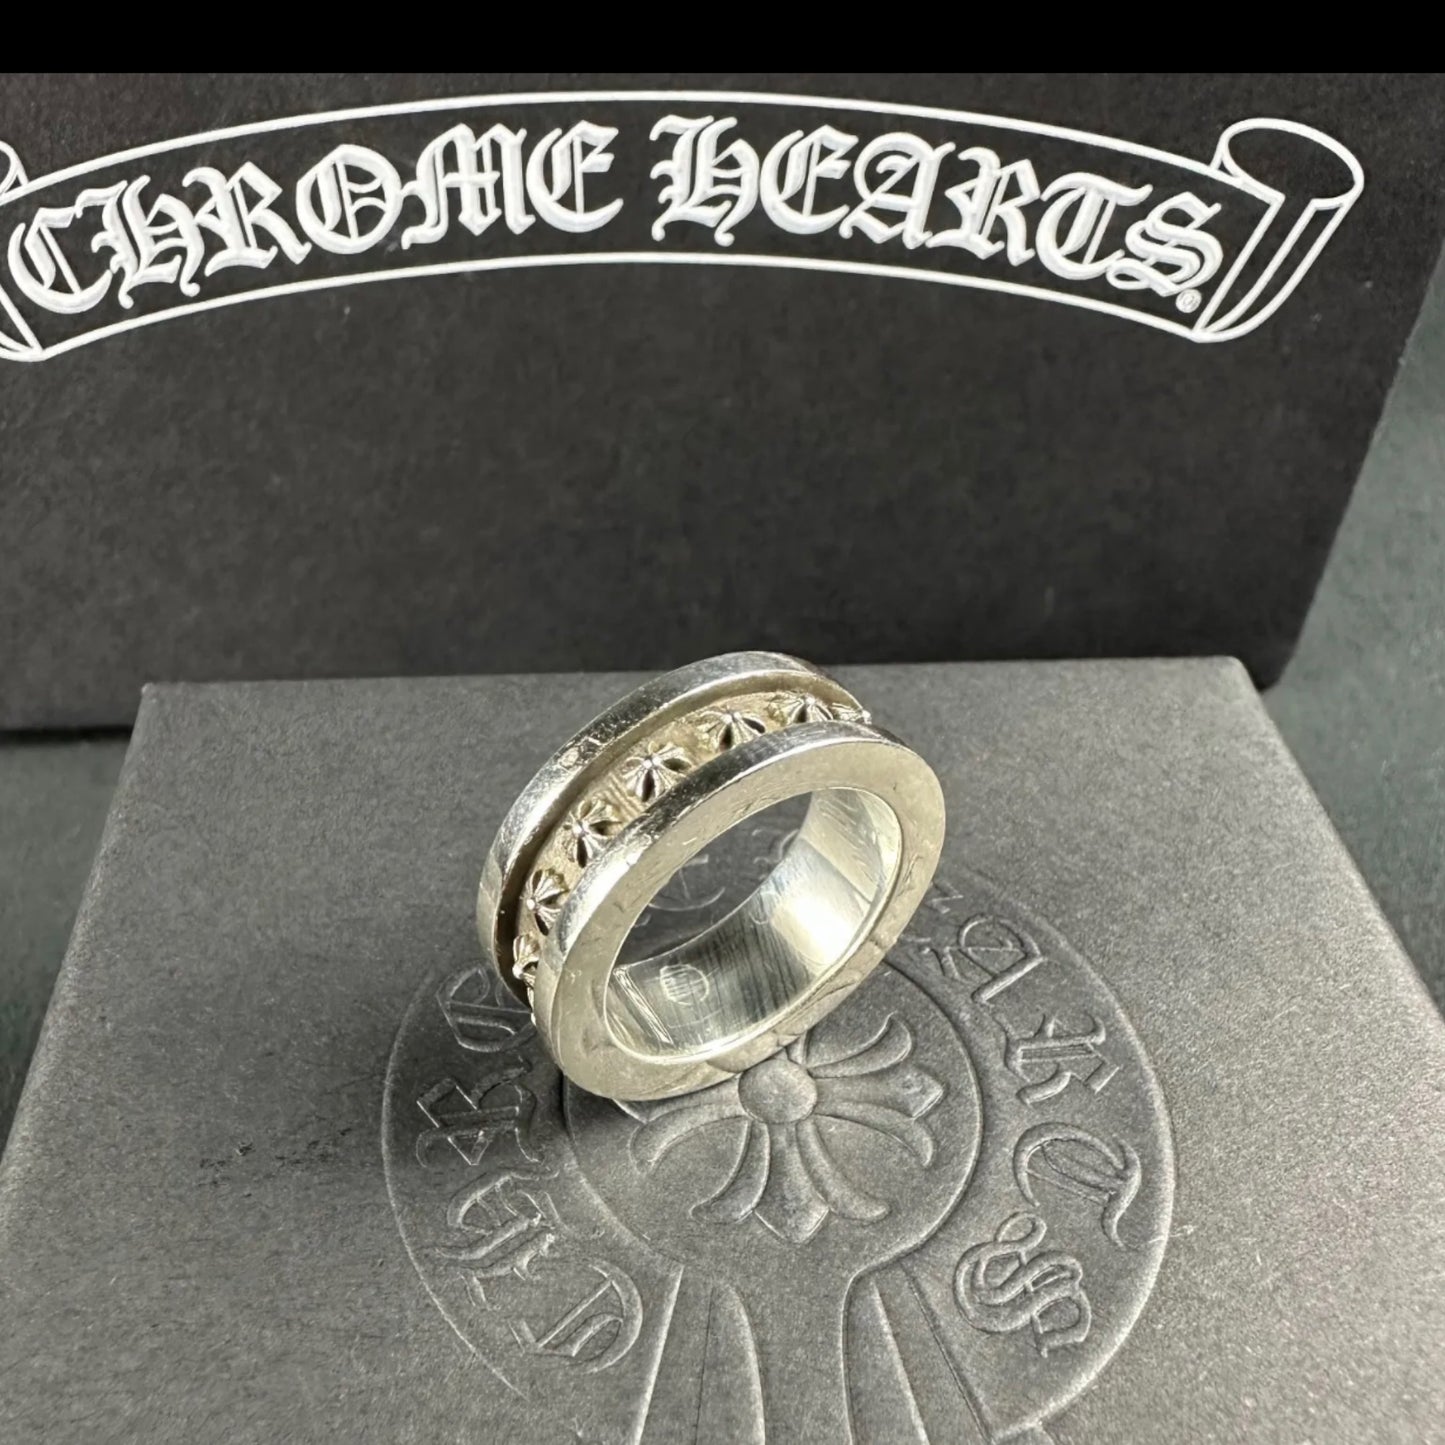 Brand New Chrome Hearts Ring Size 7